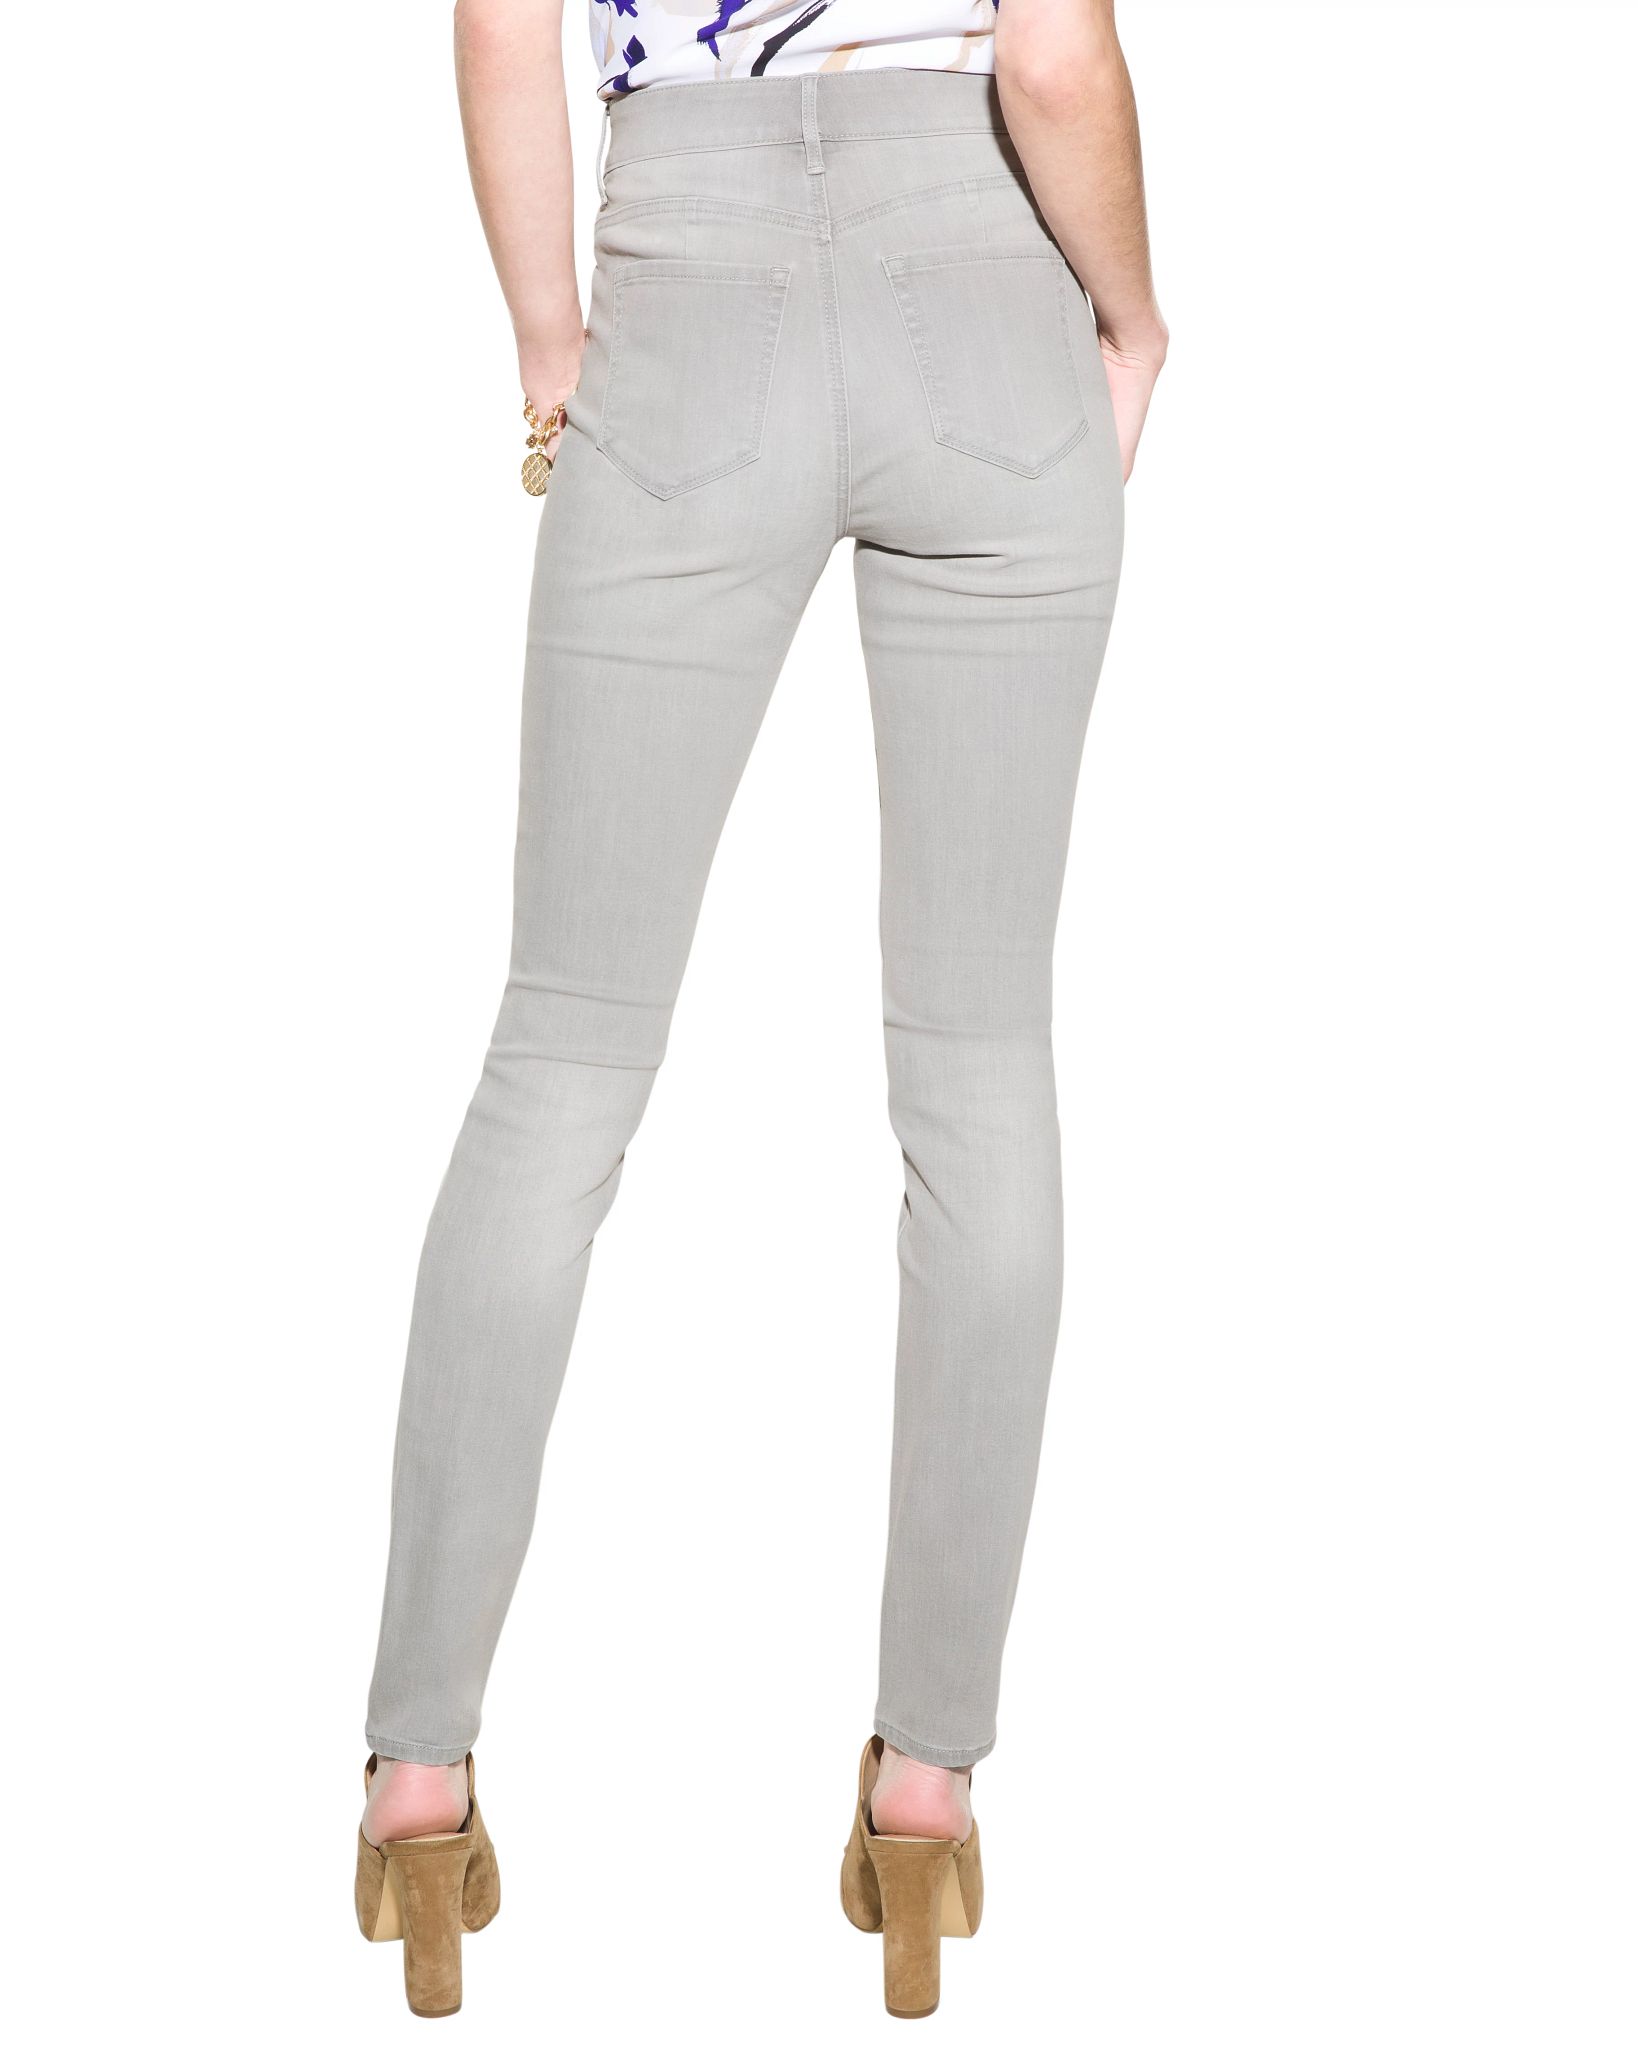 Outlet WHBM High-Rise Essential Slimmer® Skinny Jeans click to view larger image.